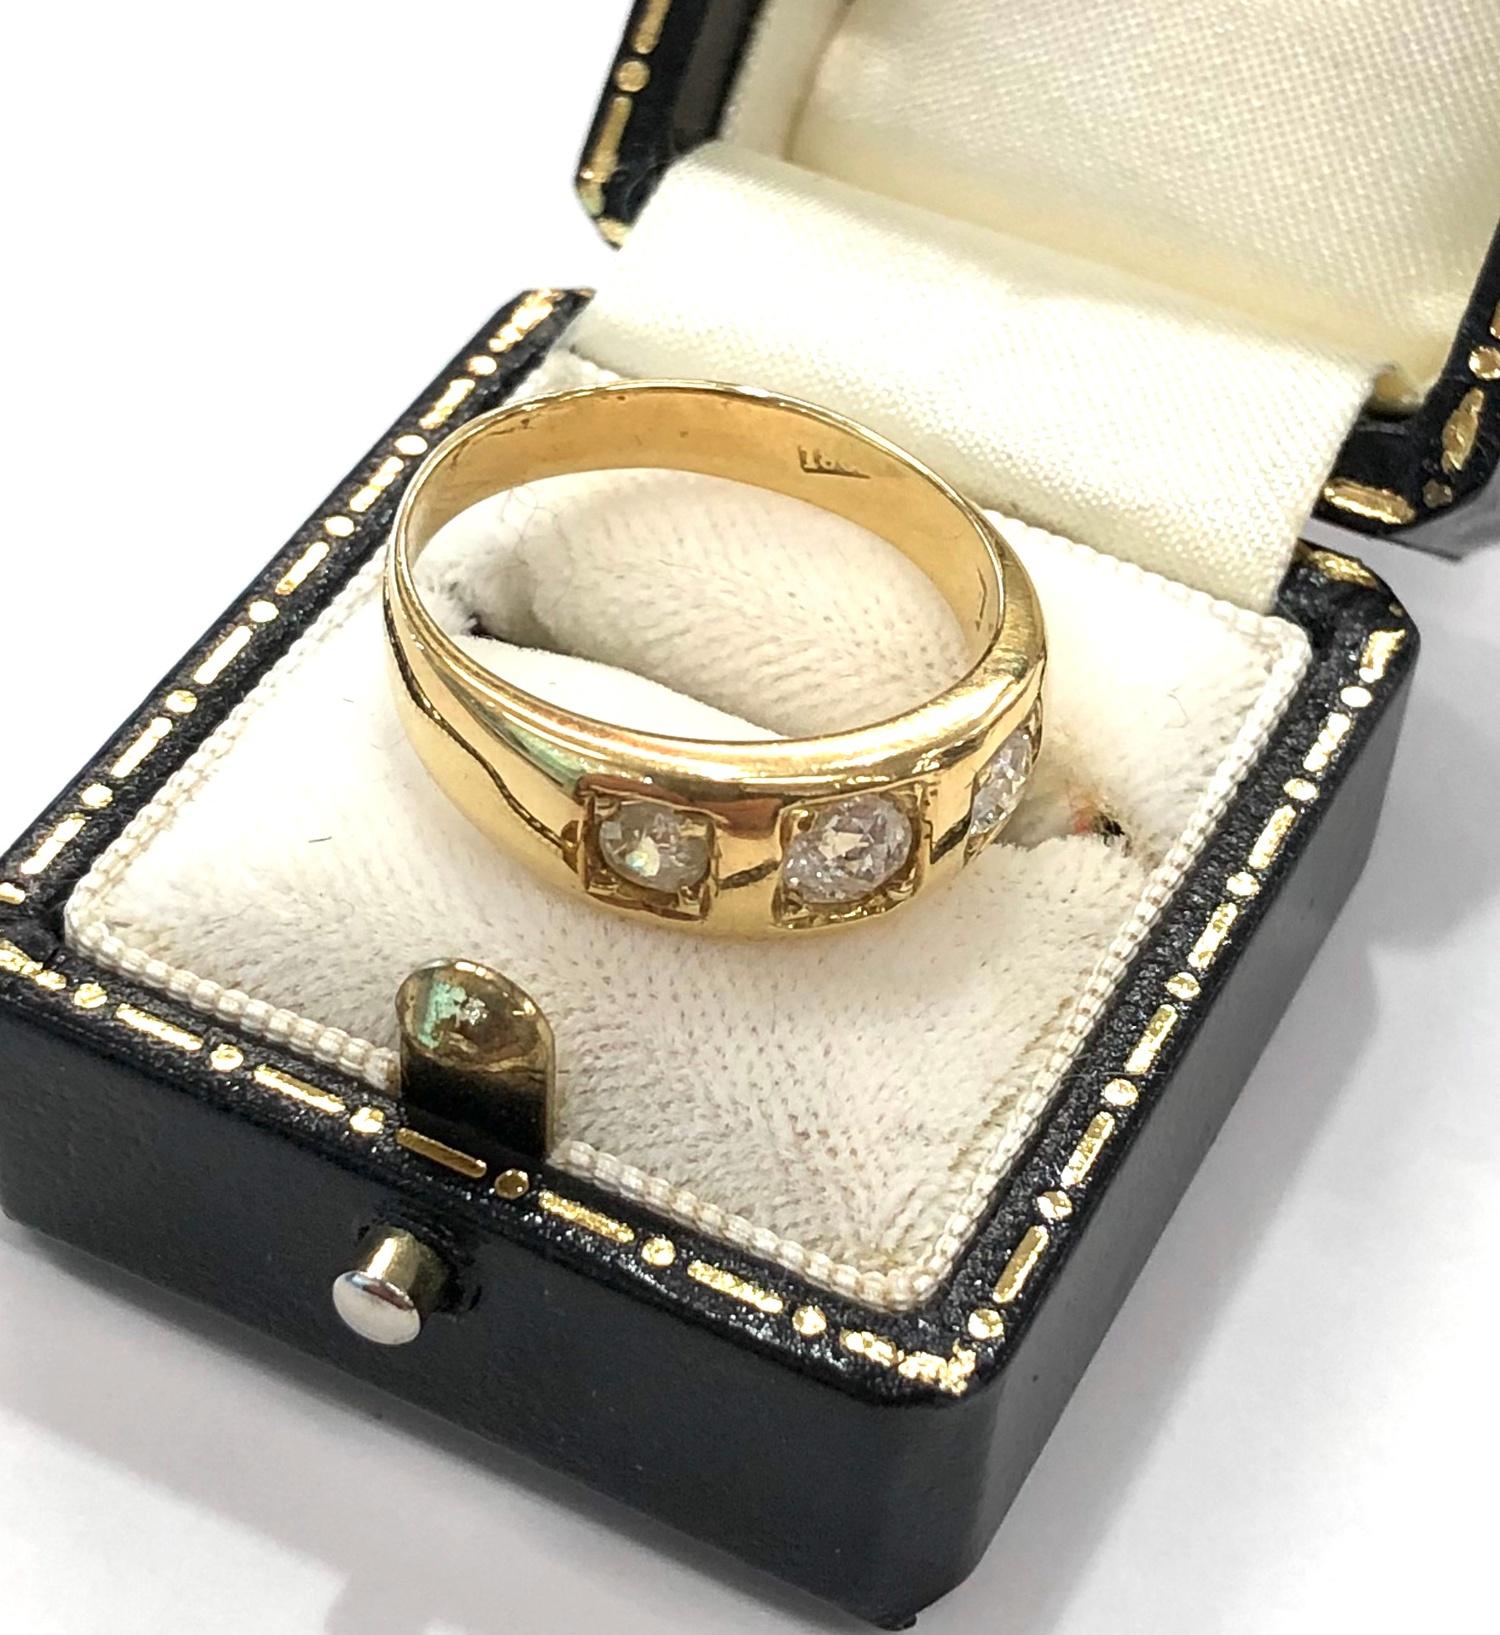 18ct Gold three stone diamond ring the central diamond measures approx 4mm dia weight of ring 6.4g - Image 4 of 6